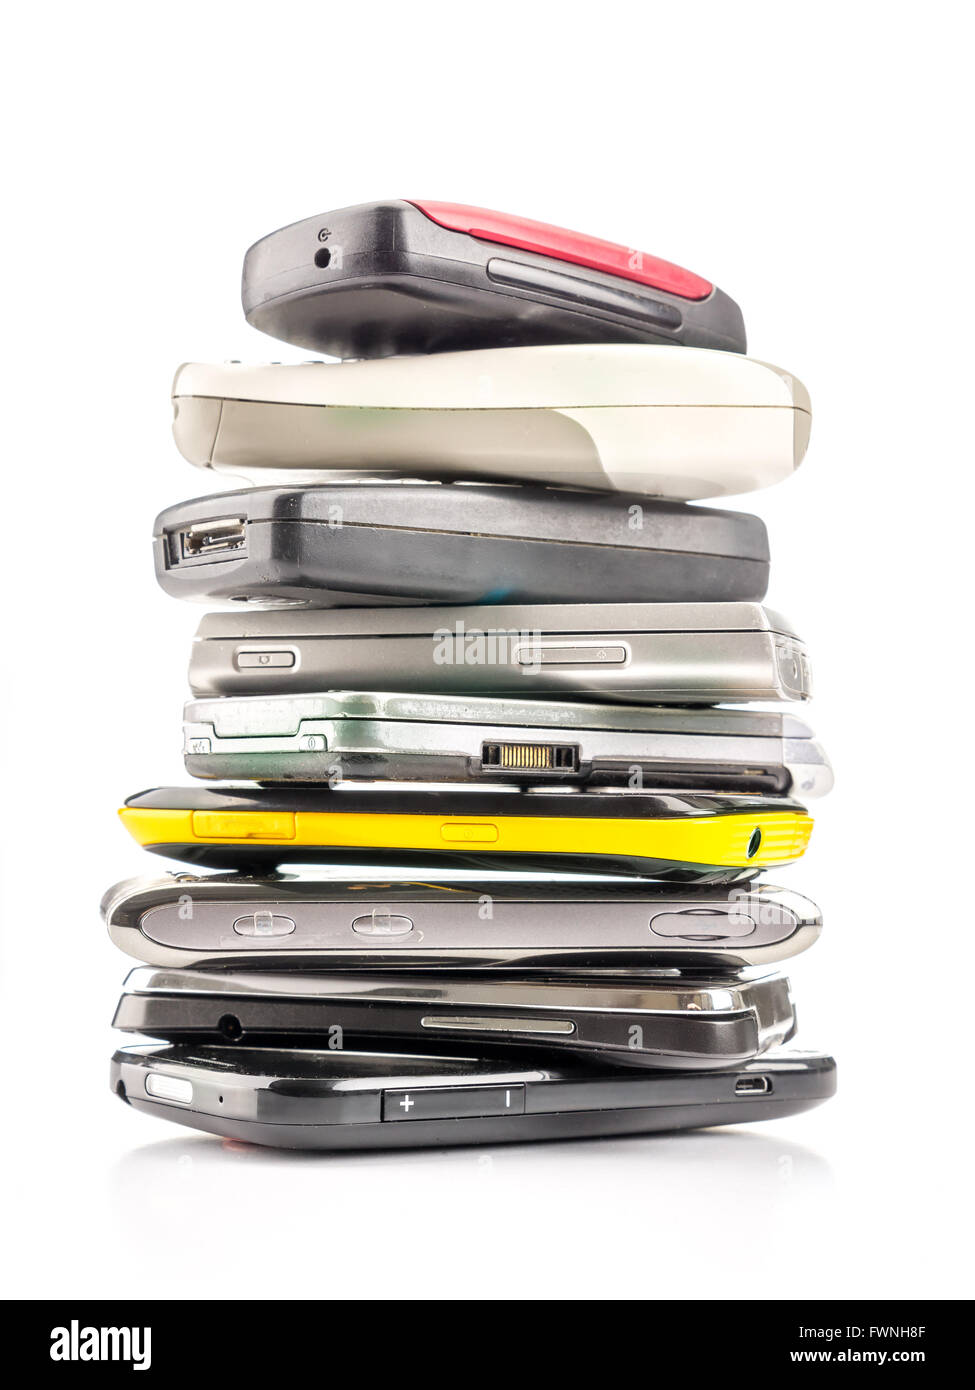 Pile of old and used mobile phones on white background Stock Photo